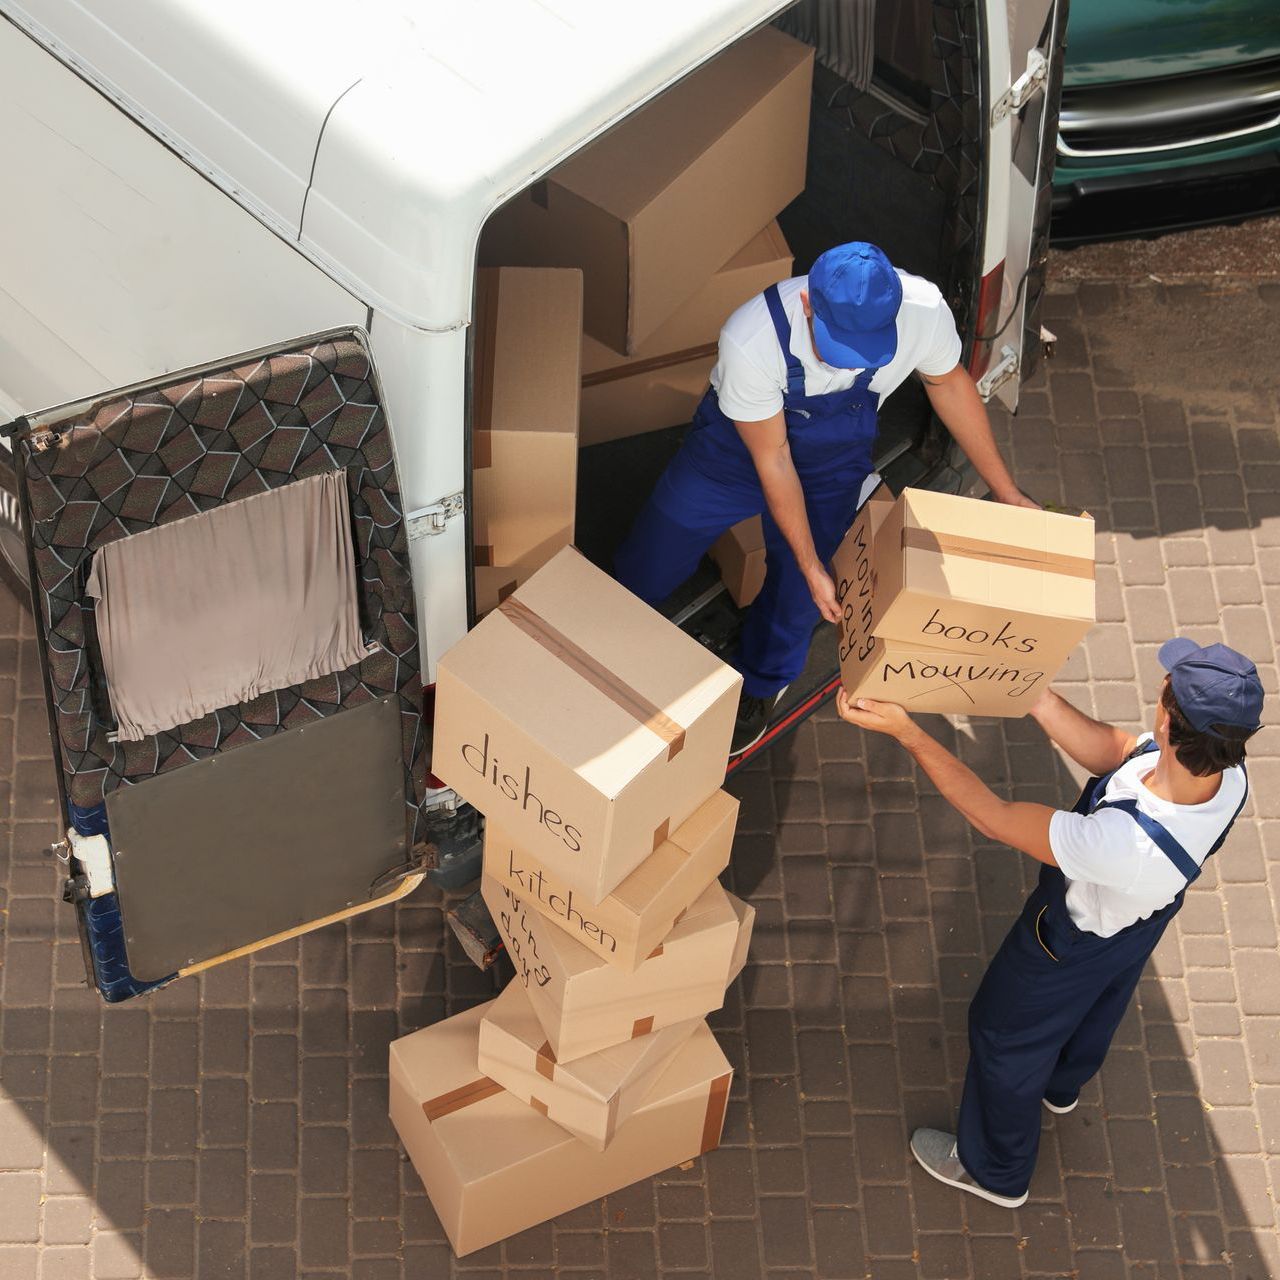 two men are loading boxes into a van .